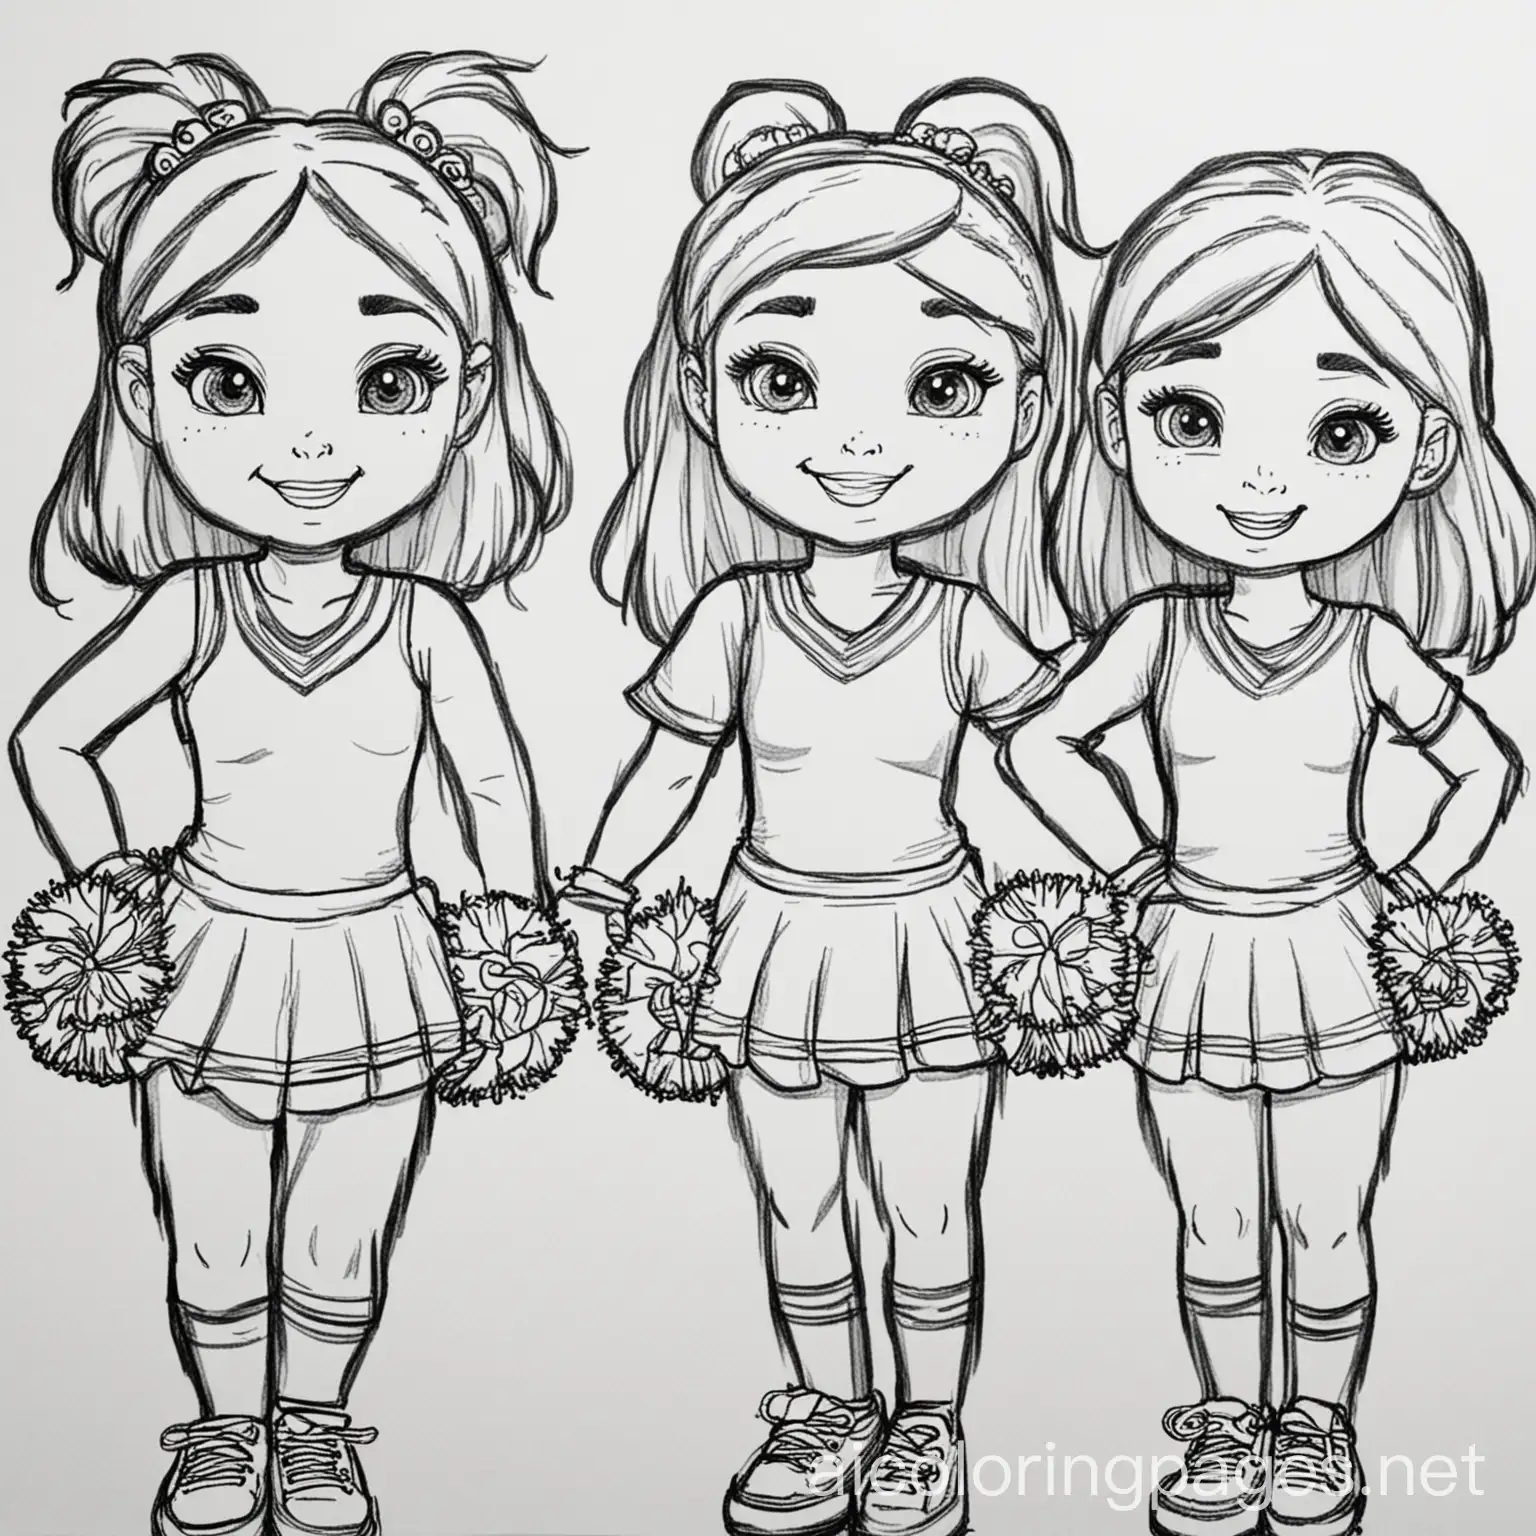 young cheerleaders on a cheer squad, Coloring Page, black and white, line art, white background, Simplicity, Ample White Space. The background of the coloring page is plain white to make it easy for young children to color within the lines. The outlines of all the subjects are easy to distinguish, making it simple for kids to color without too much difficulty